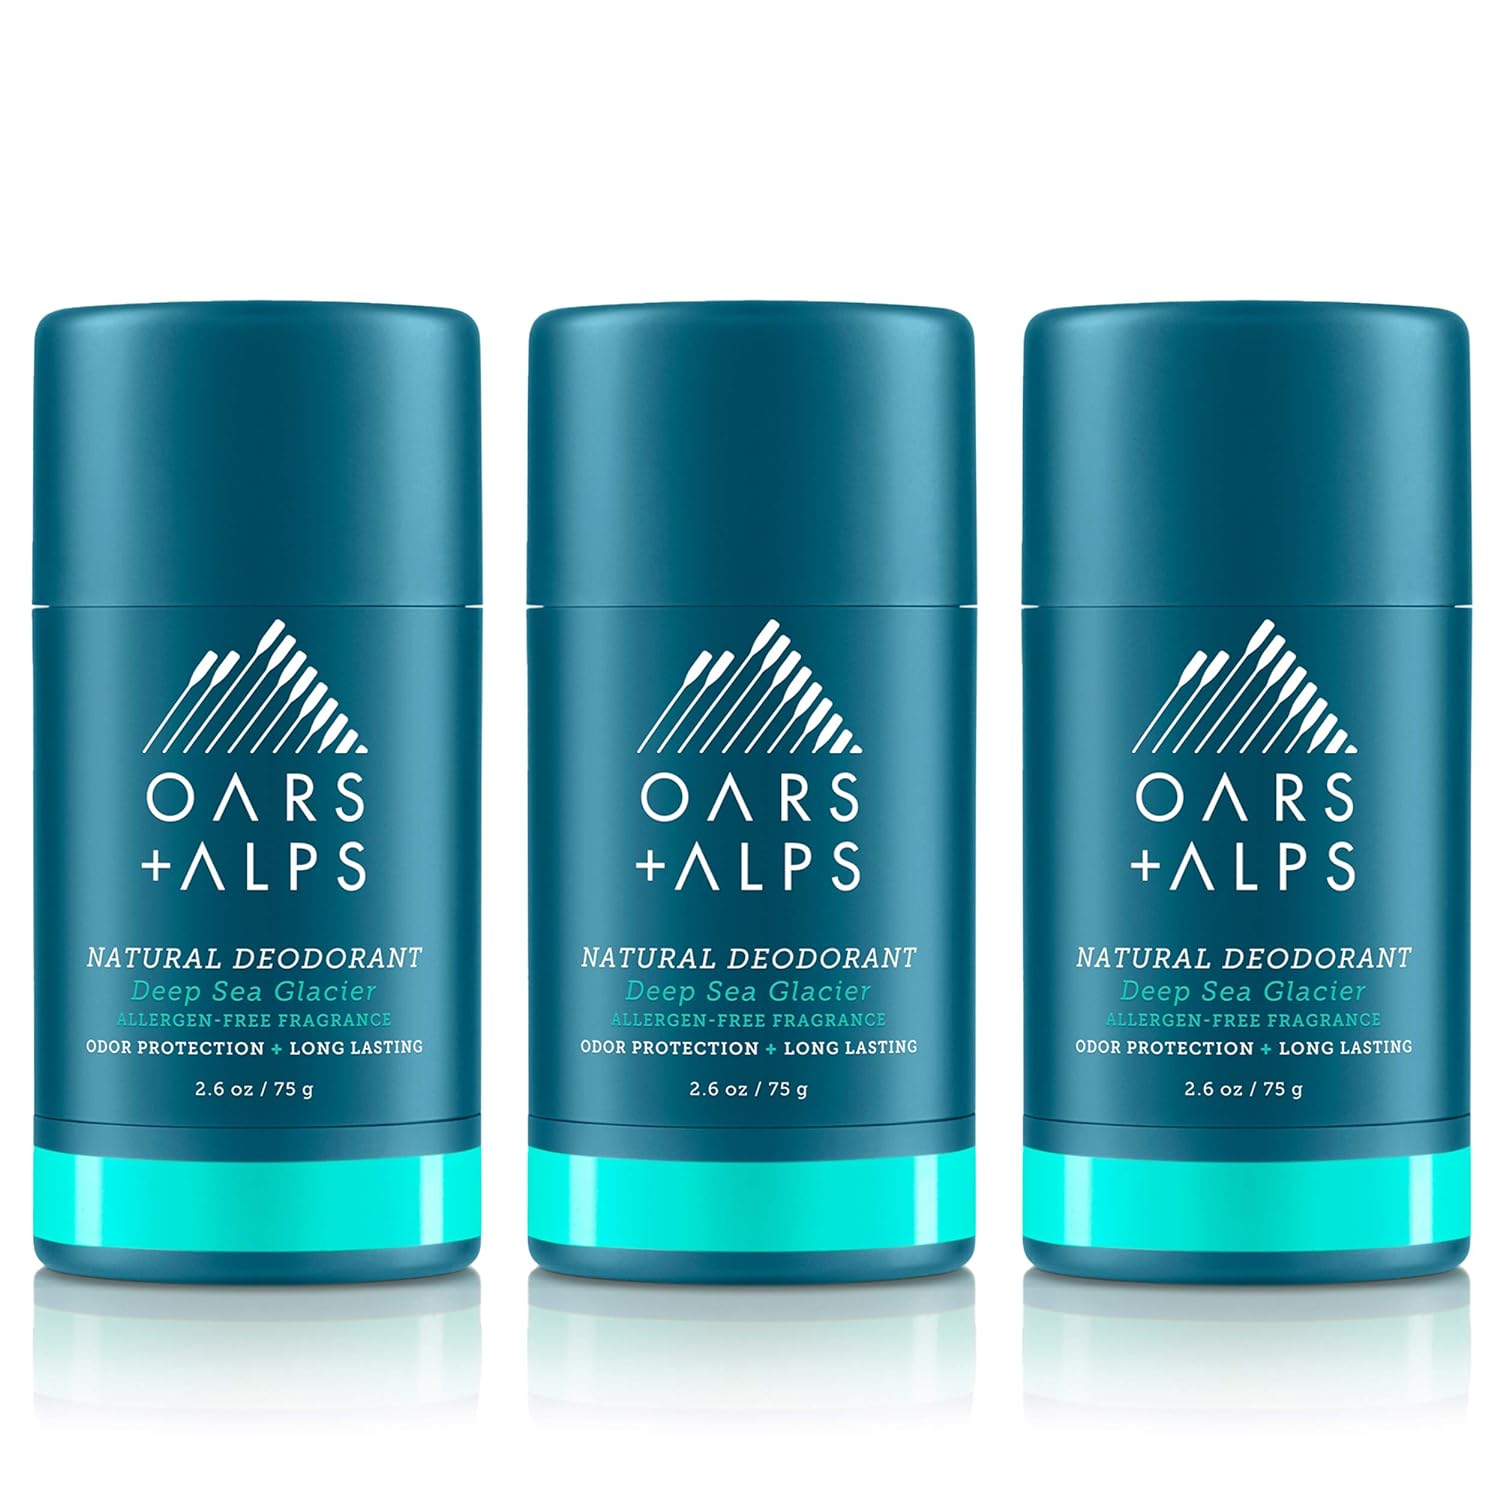 Oars + Alps Aluminum Free Deodorant for Men and Women, Dermatologist Tested, Travel Size, Deep Sea Glacier, 3 Pack, 2.6 Oz Each